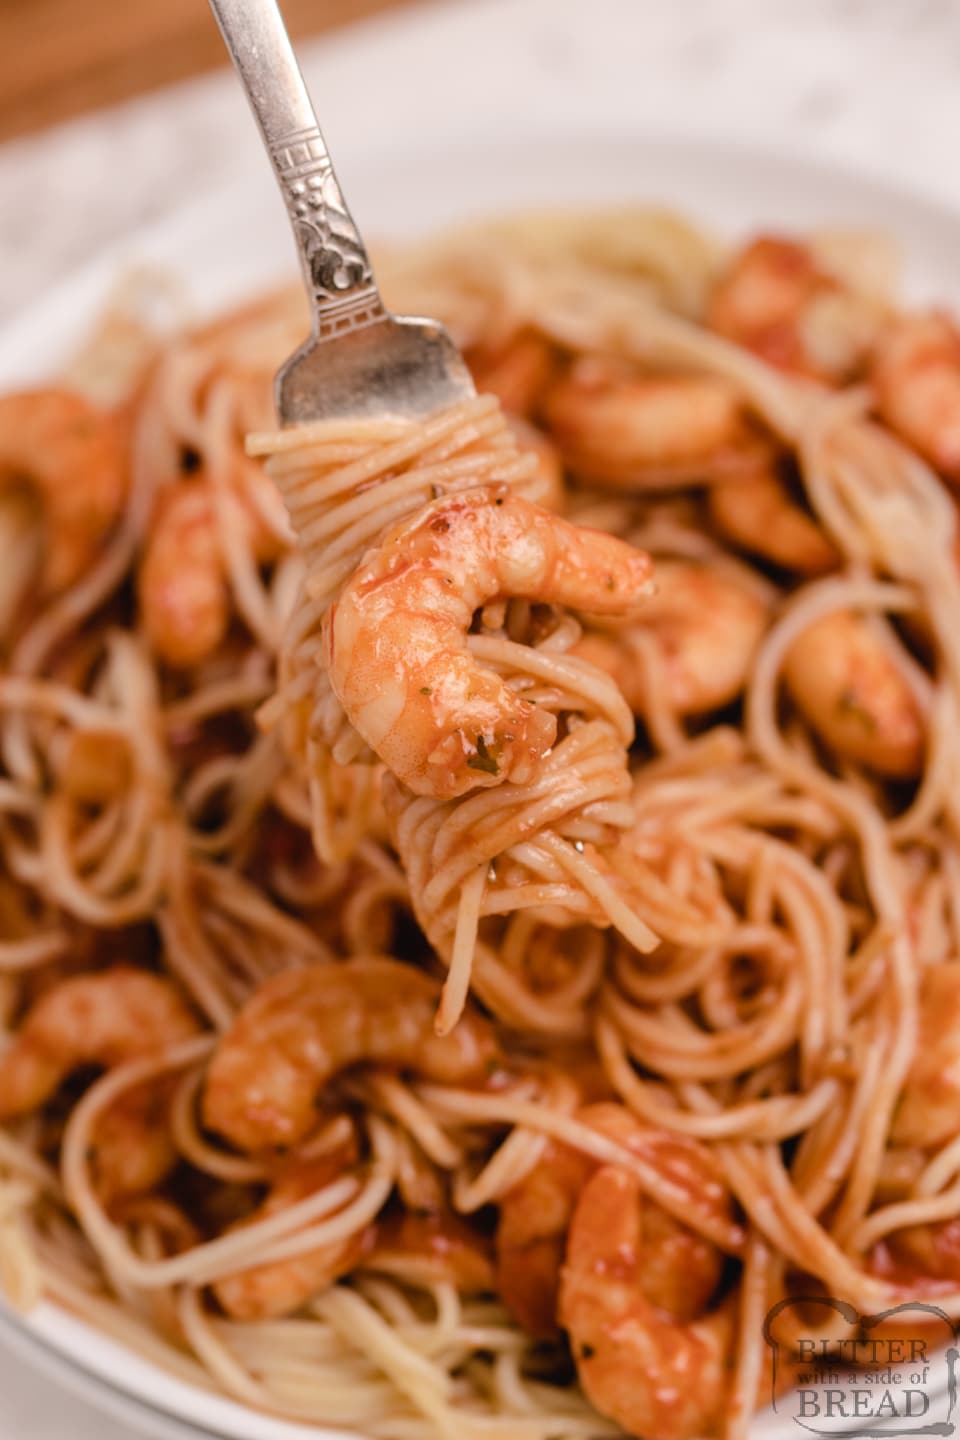 Spicy Shrimp Scampi is buttery, full of flavor and tastes delicious over angel hair pasta. This buttery scampi sauce with shrimp is simple, impressive and only takes a few minutes to prep.